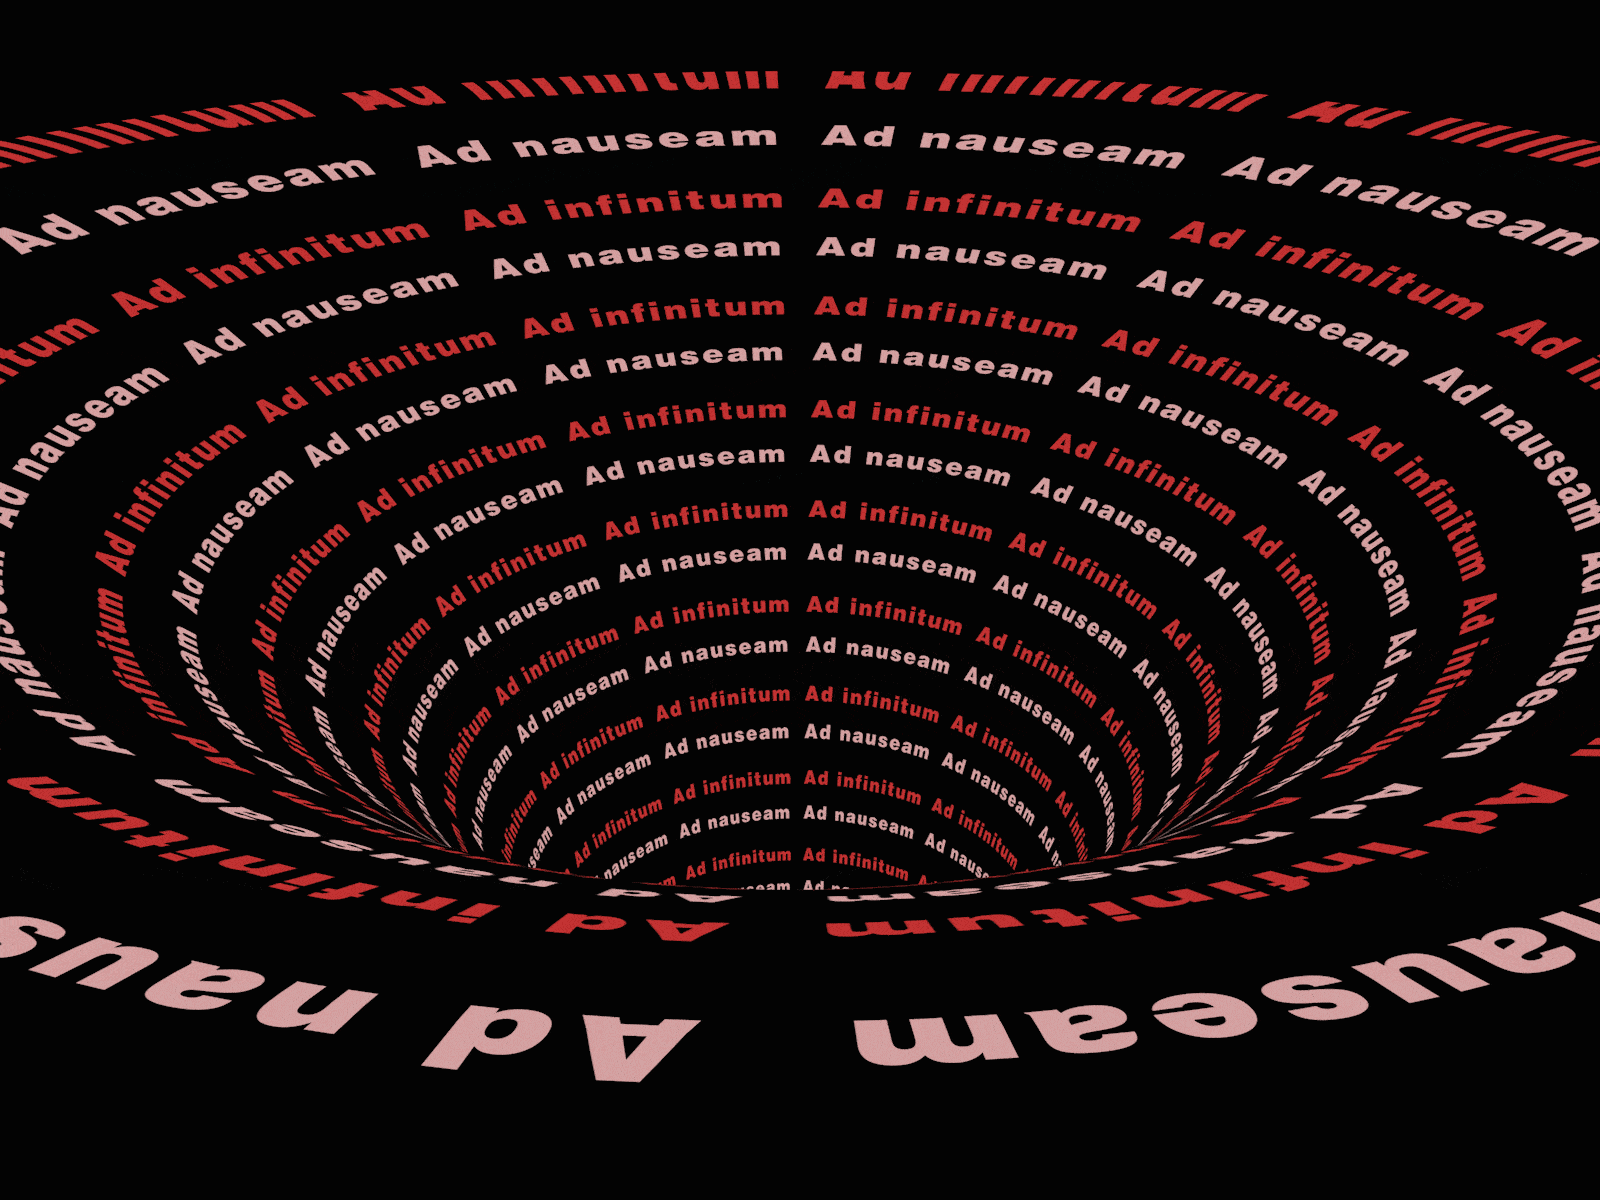 mograph - Kinetic Typography Experiment 3d after effect animated animated poster animation blender3d blood cinema4d gif lettering lettering art mograph motion motion design motiongraphics poster red typo typogaphy typography art